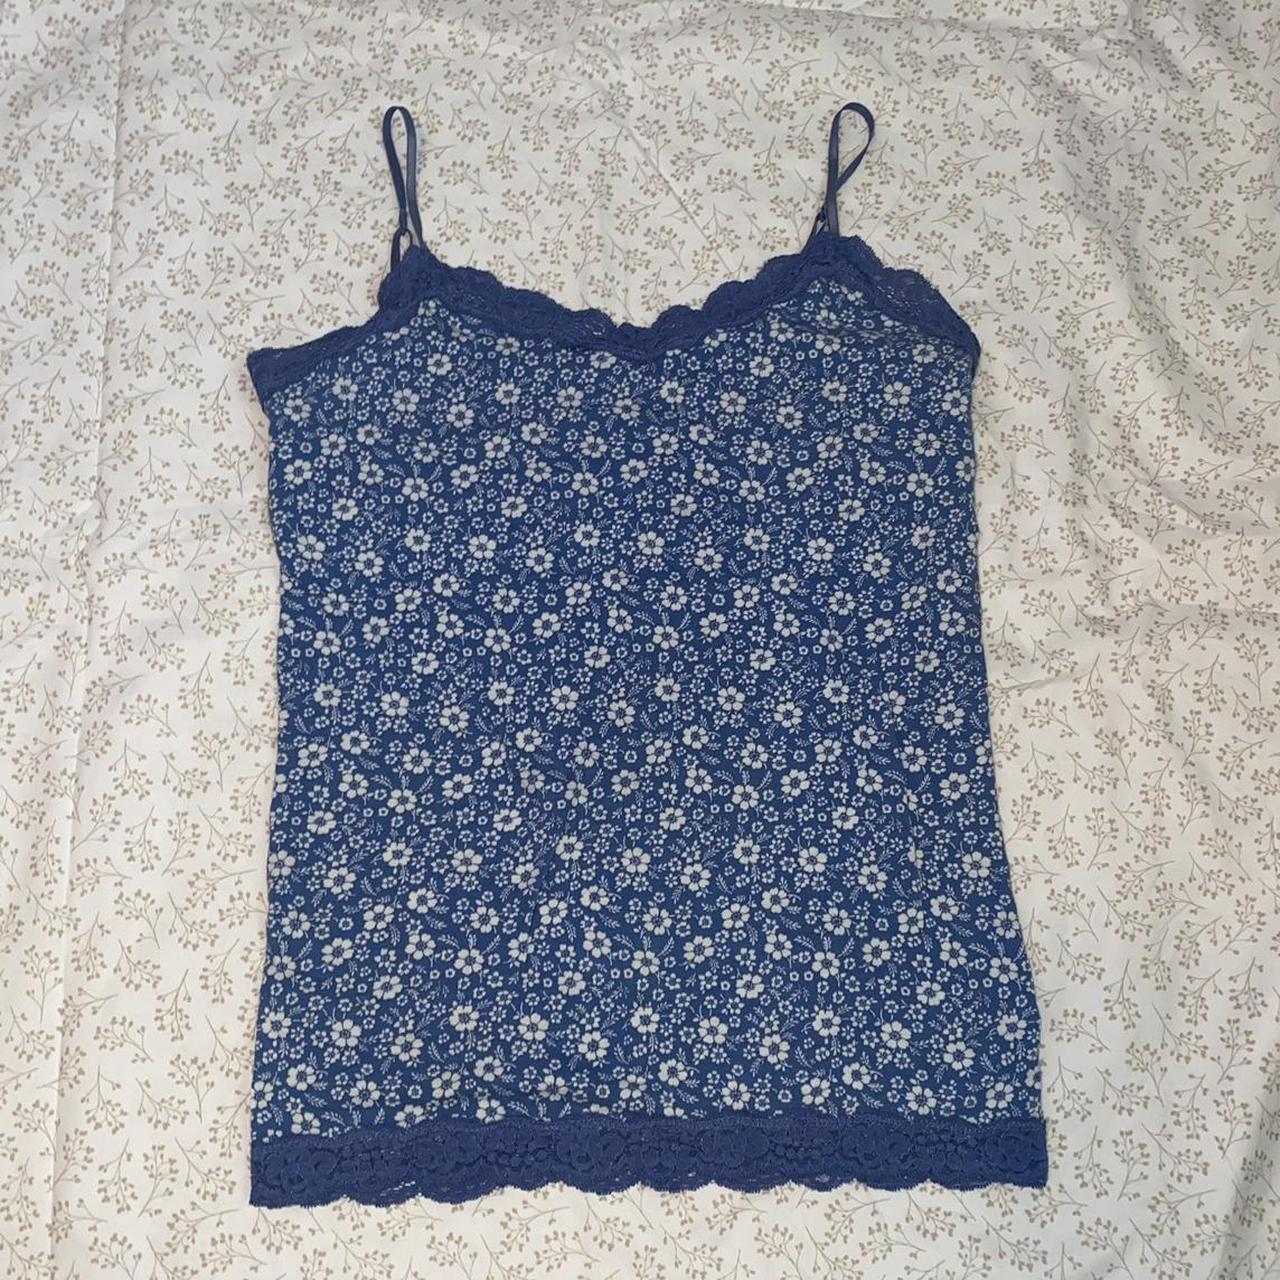 Aéropostale Floral Tank Top Camisole 🎀 tagged a - Depop